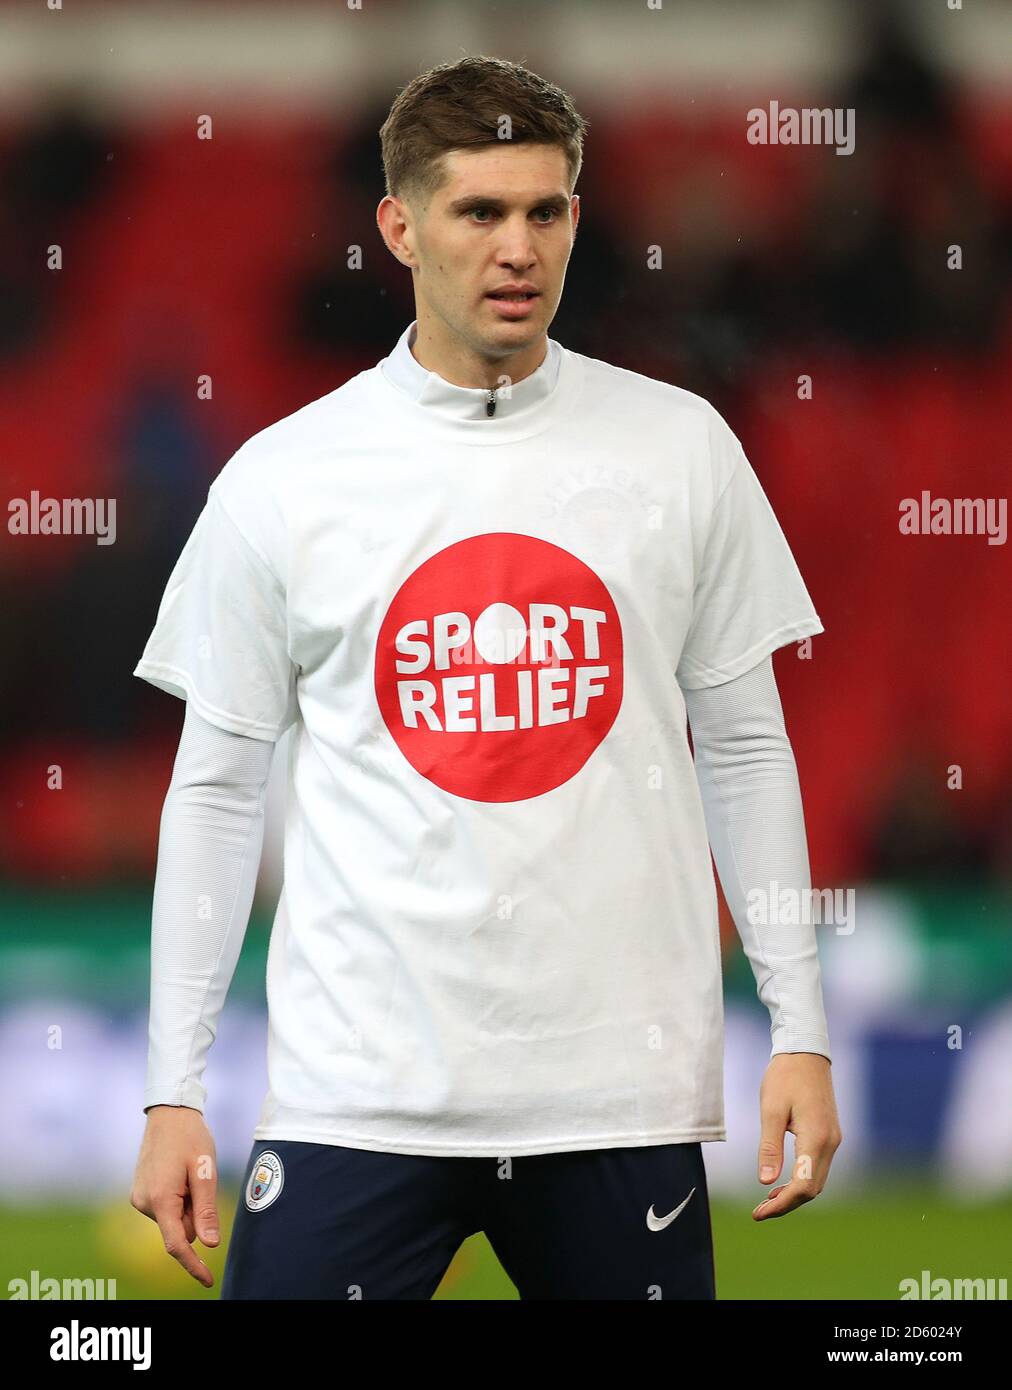 Manchester City's John Stones wearing a Sport Relief t-shirt during the warm-up before the game Stock Photo - Alamy